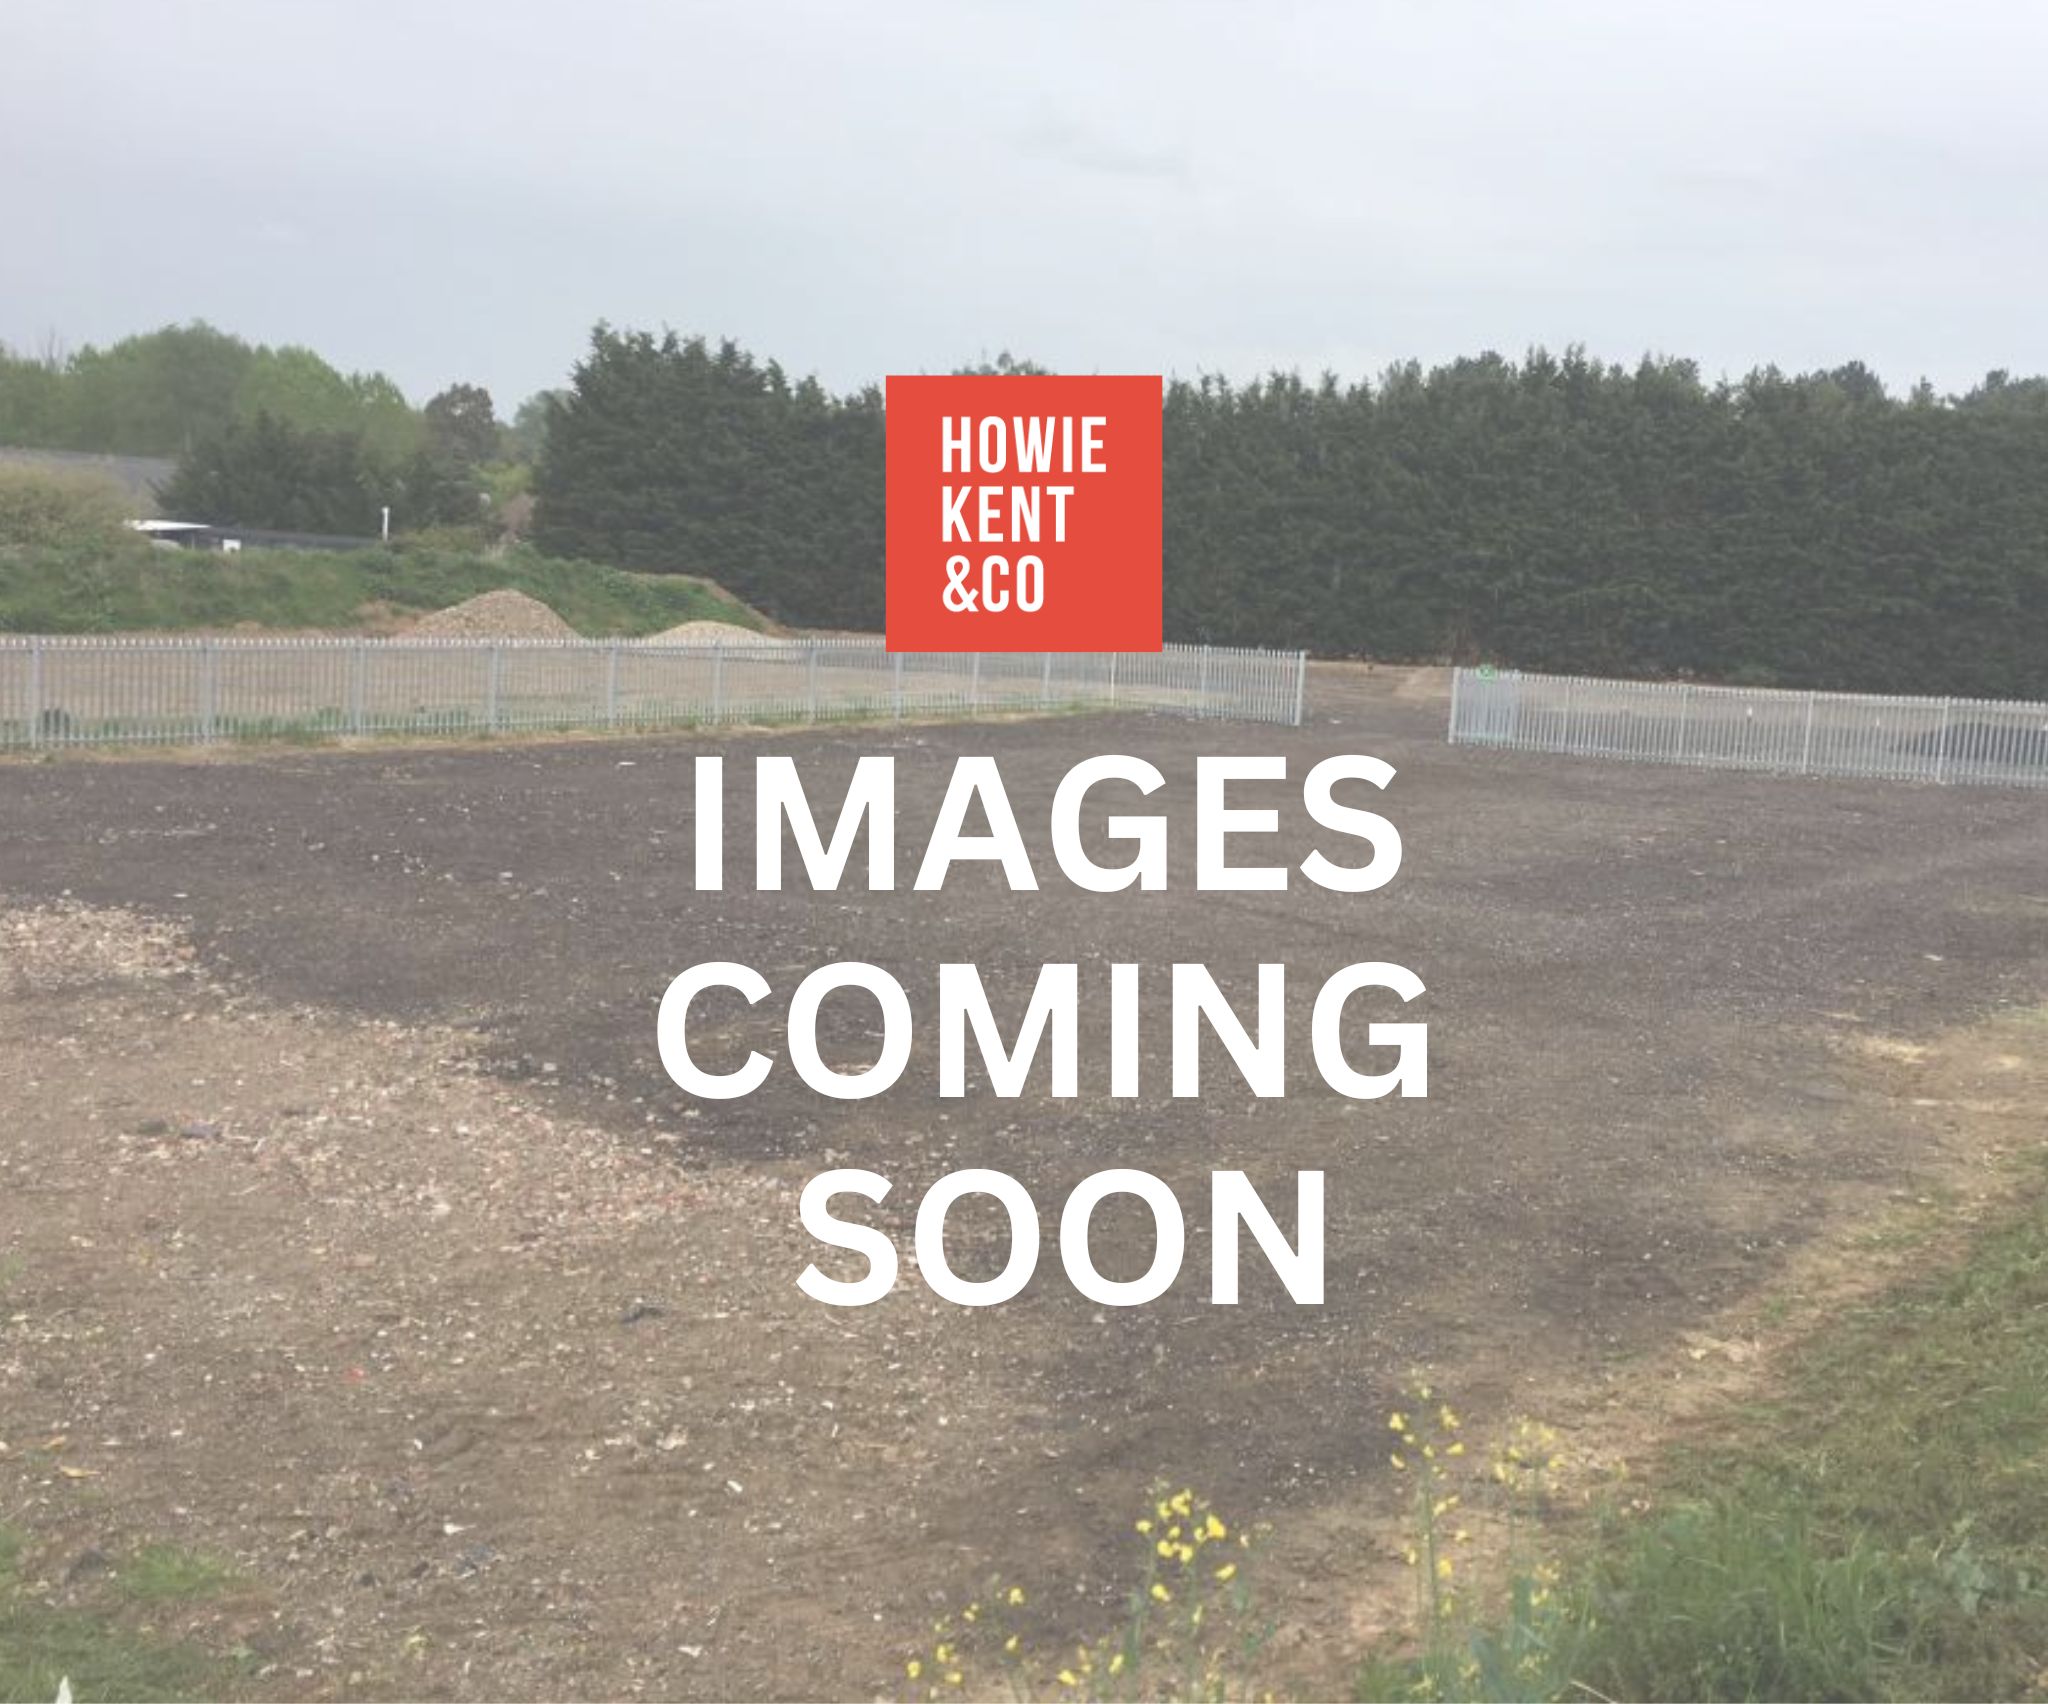 Open Yard to Let in Wickford, Essex with good access to the A127 & A130